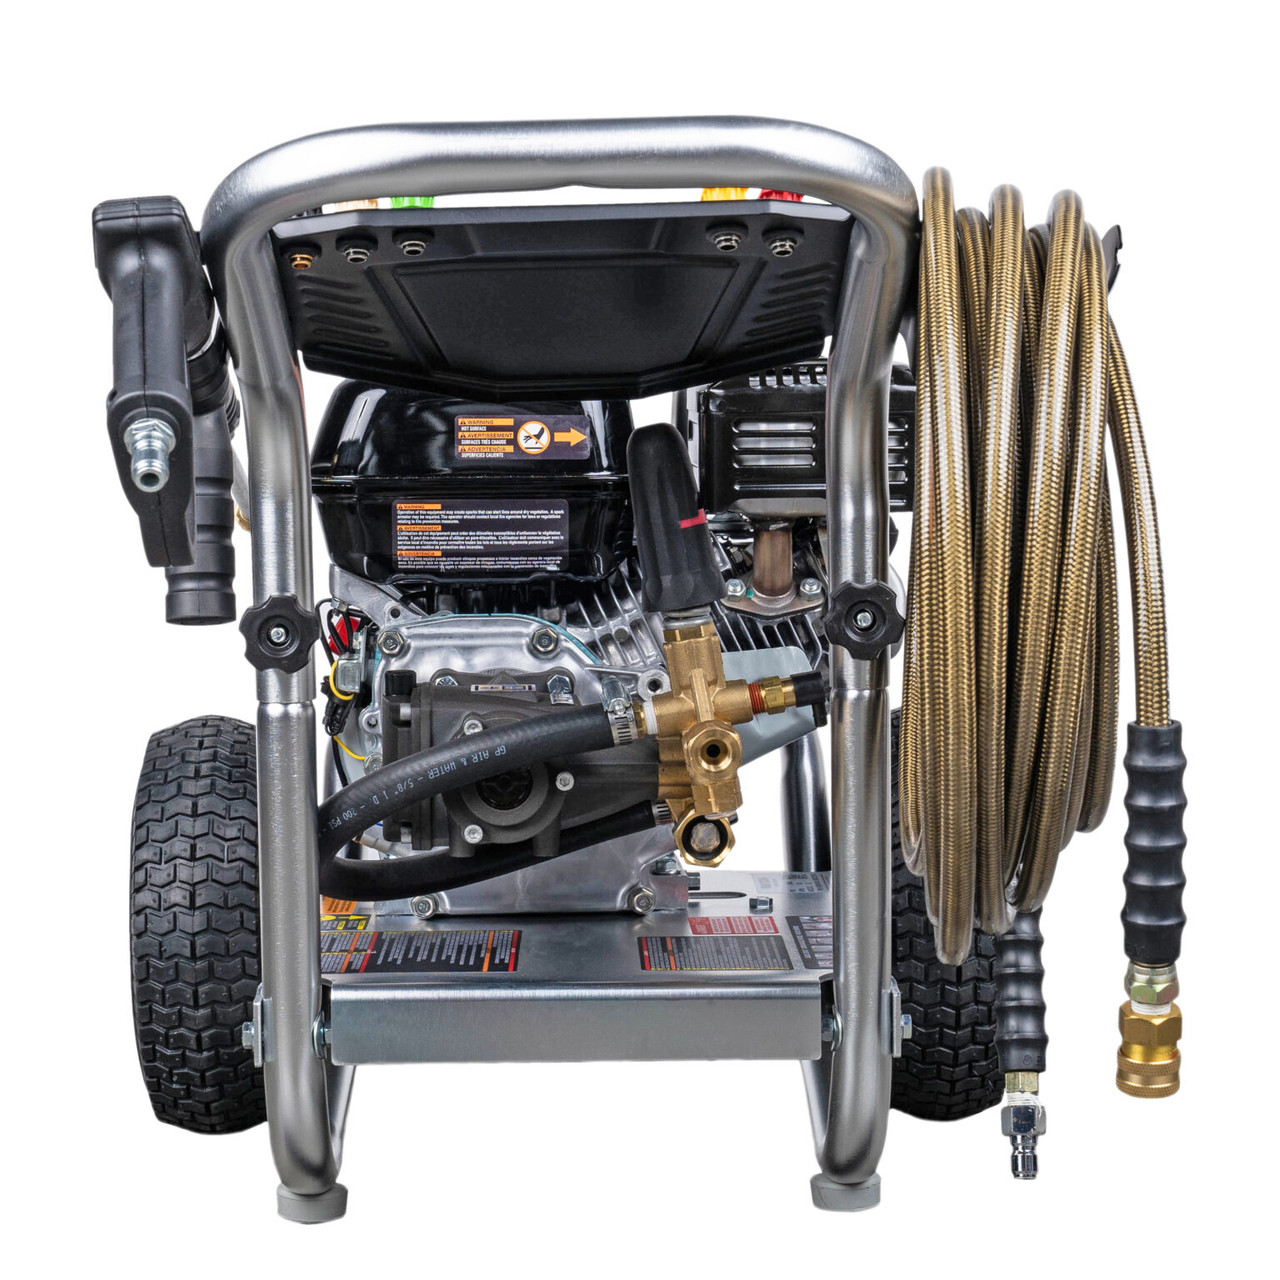 SIMPSON Industrial Series IR61024 Gas Professional Pressure Washer 3000 PSI at 3.0 GPM